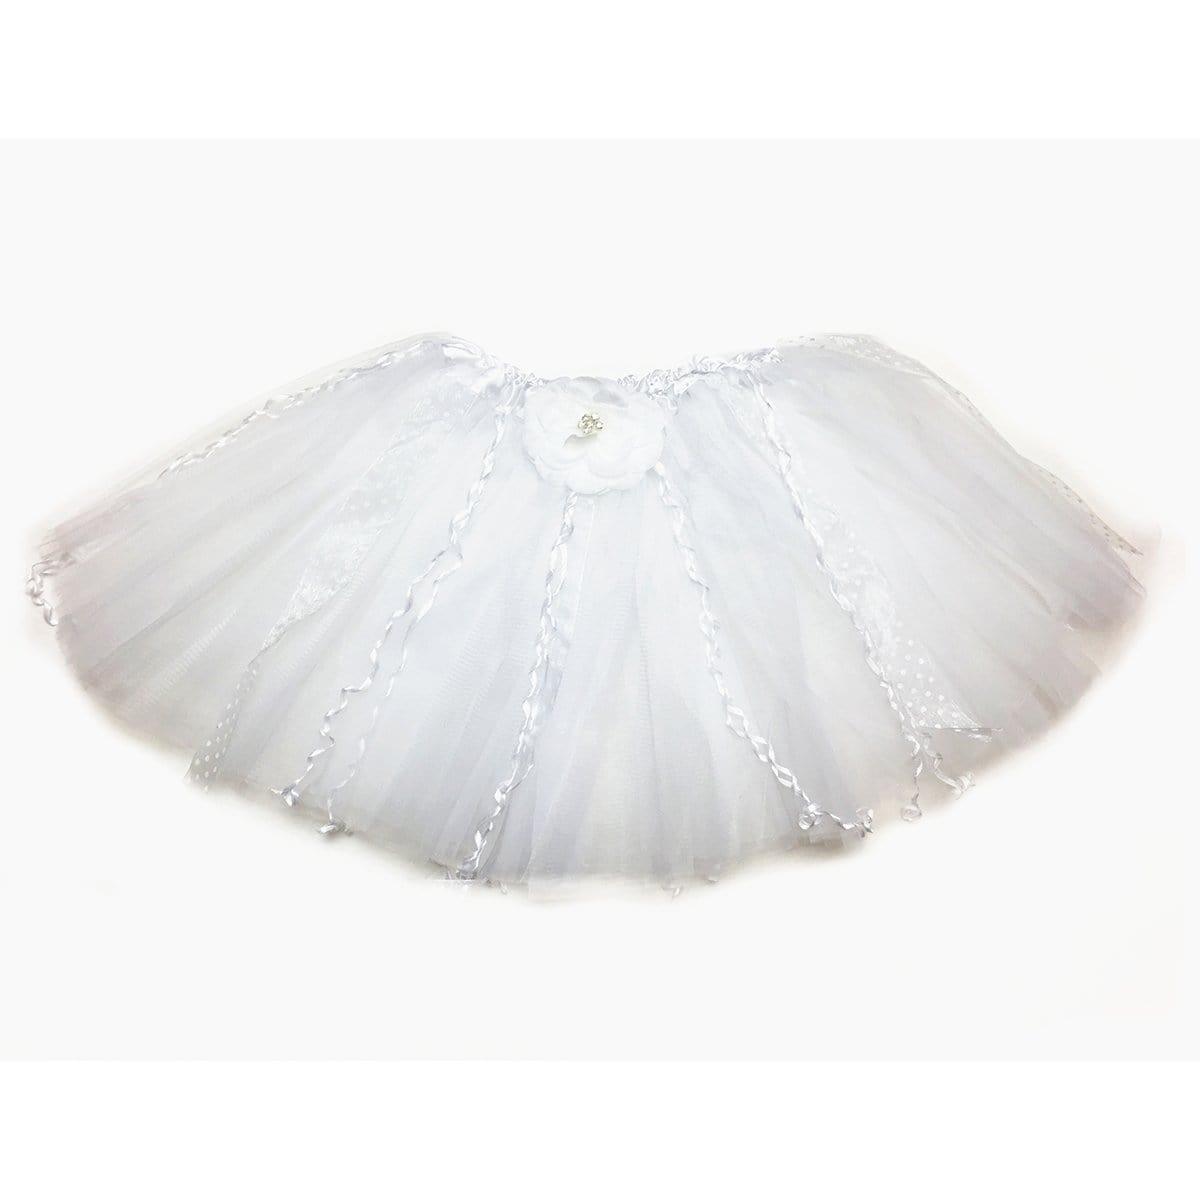 Buy Costume Accessories White tutu for girls sold at Party Expert